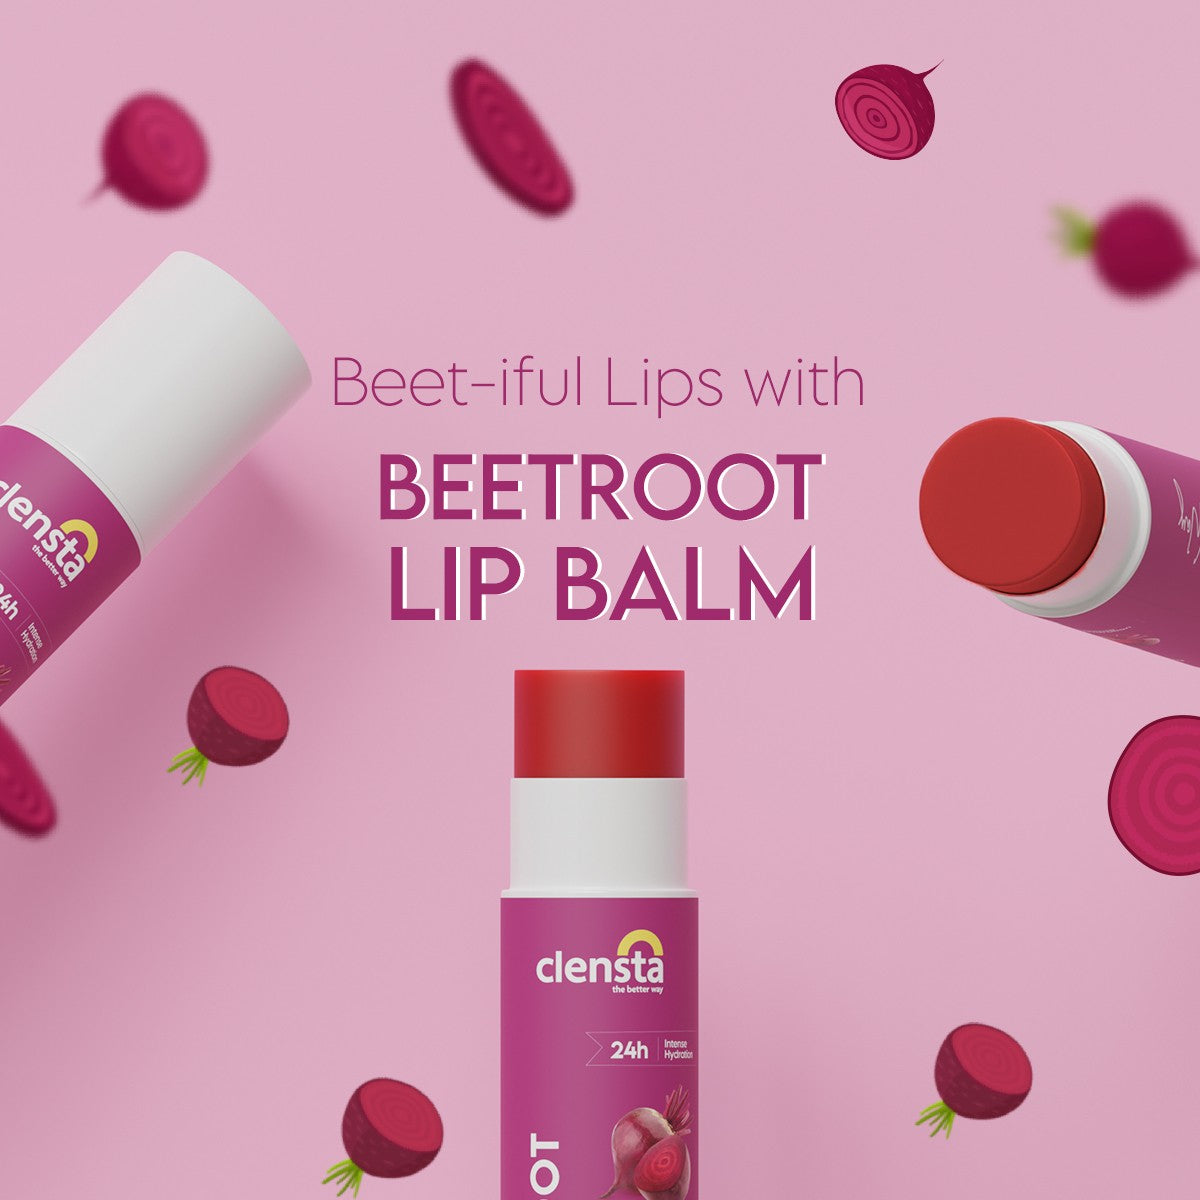 Beetroot Lip Balm | Beetroot and Hyaluronic Acid for Hydrated & Smooth Lips